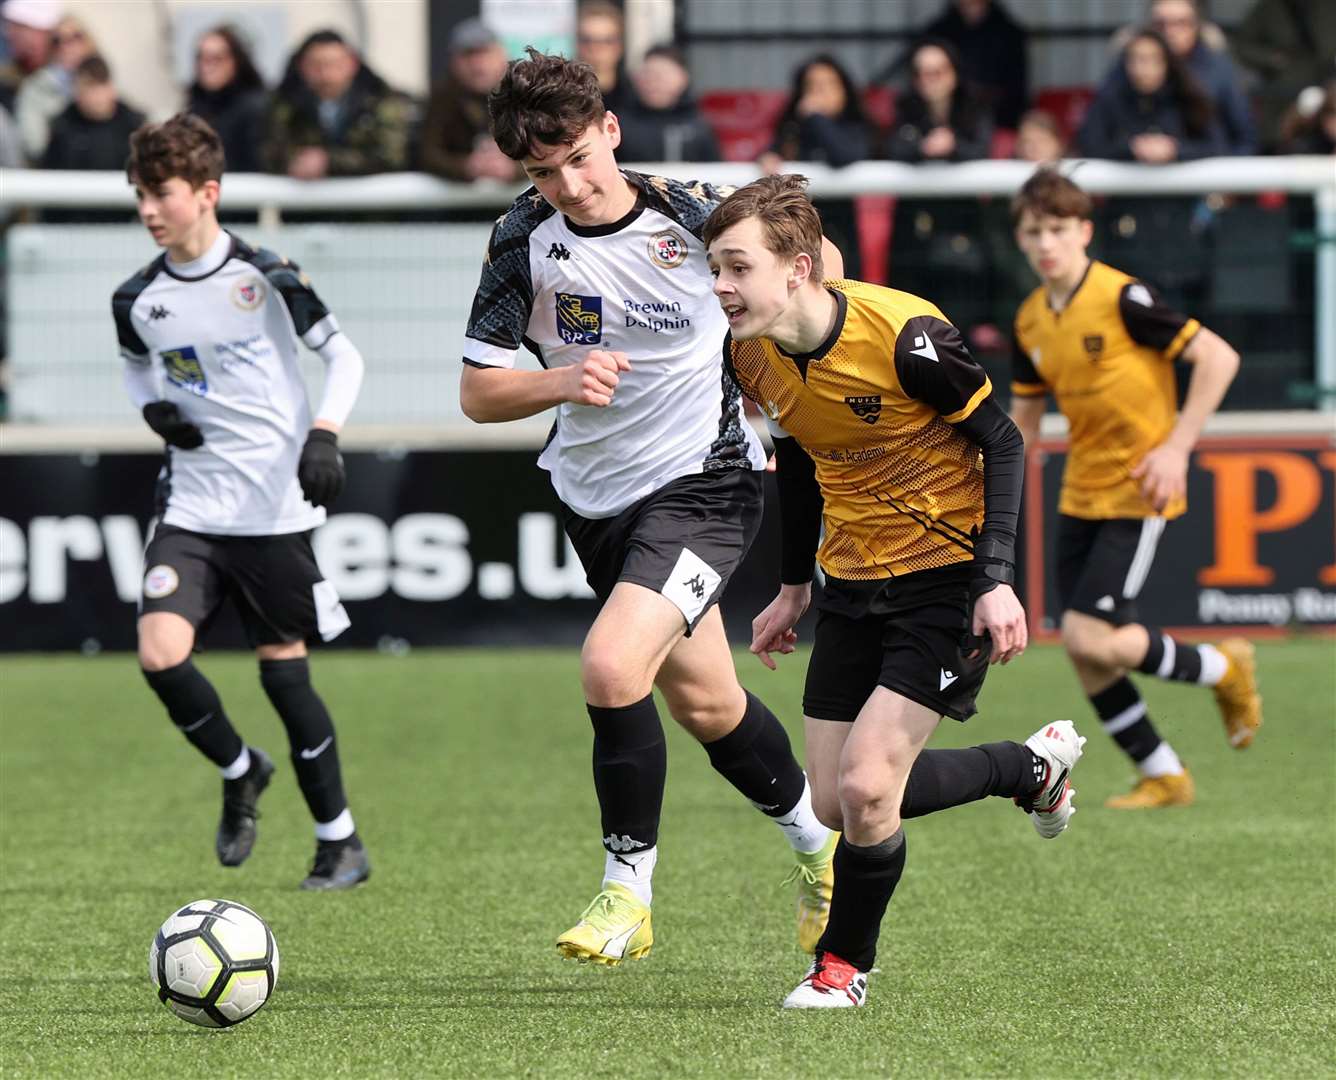 Action from the Kent Merit Under-14 Boys Cup Final between Maidstone United and Bromley (white). Picture: PSP Images